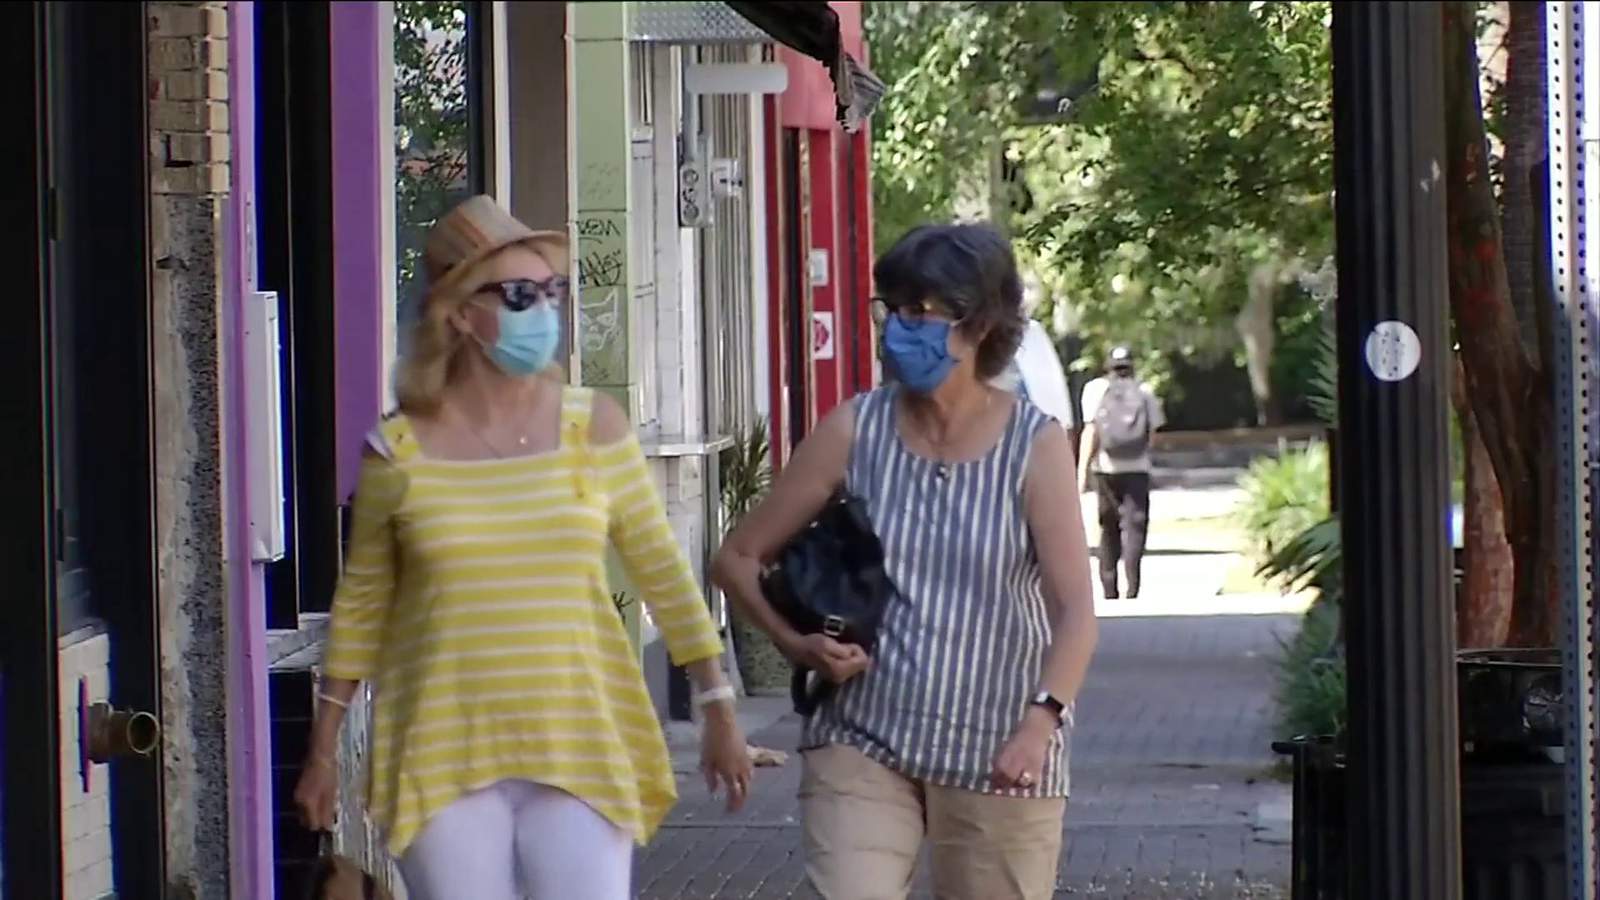 This Florida city has issued $14,400 in fines to mask violators